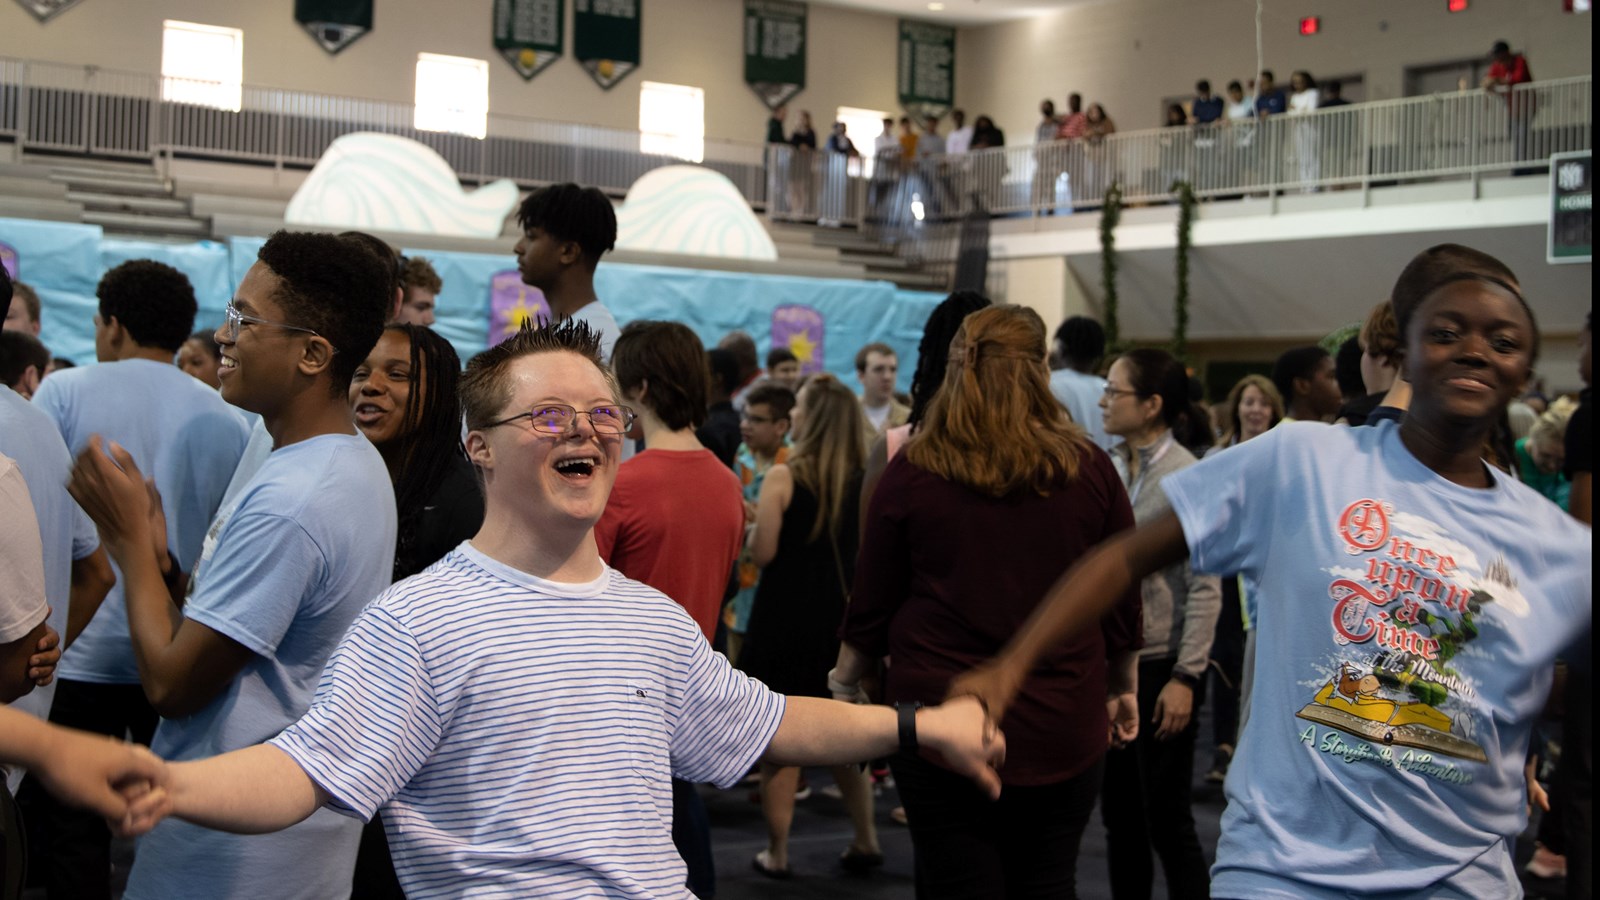 Kennesaw Mountain High School hosts dance of the year for more than 400 students with special needs from across Cobb County.